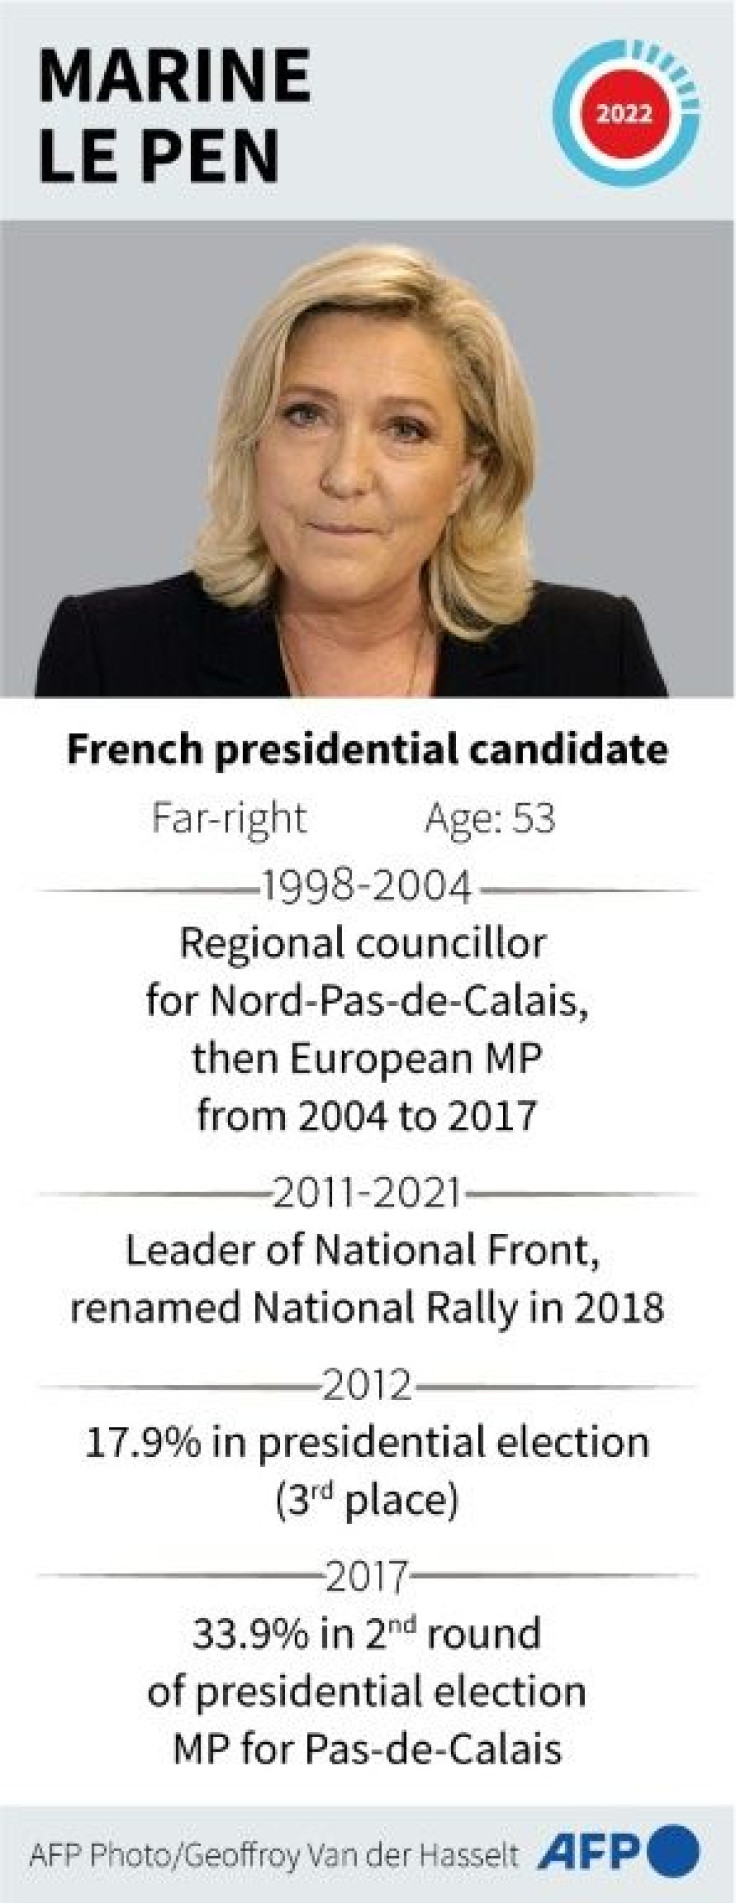 Profile of French presidential candidate Marine Le Pen